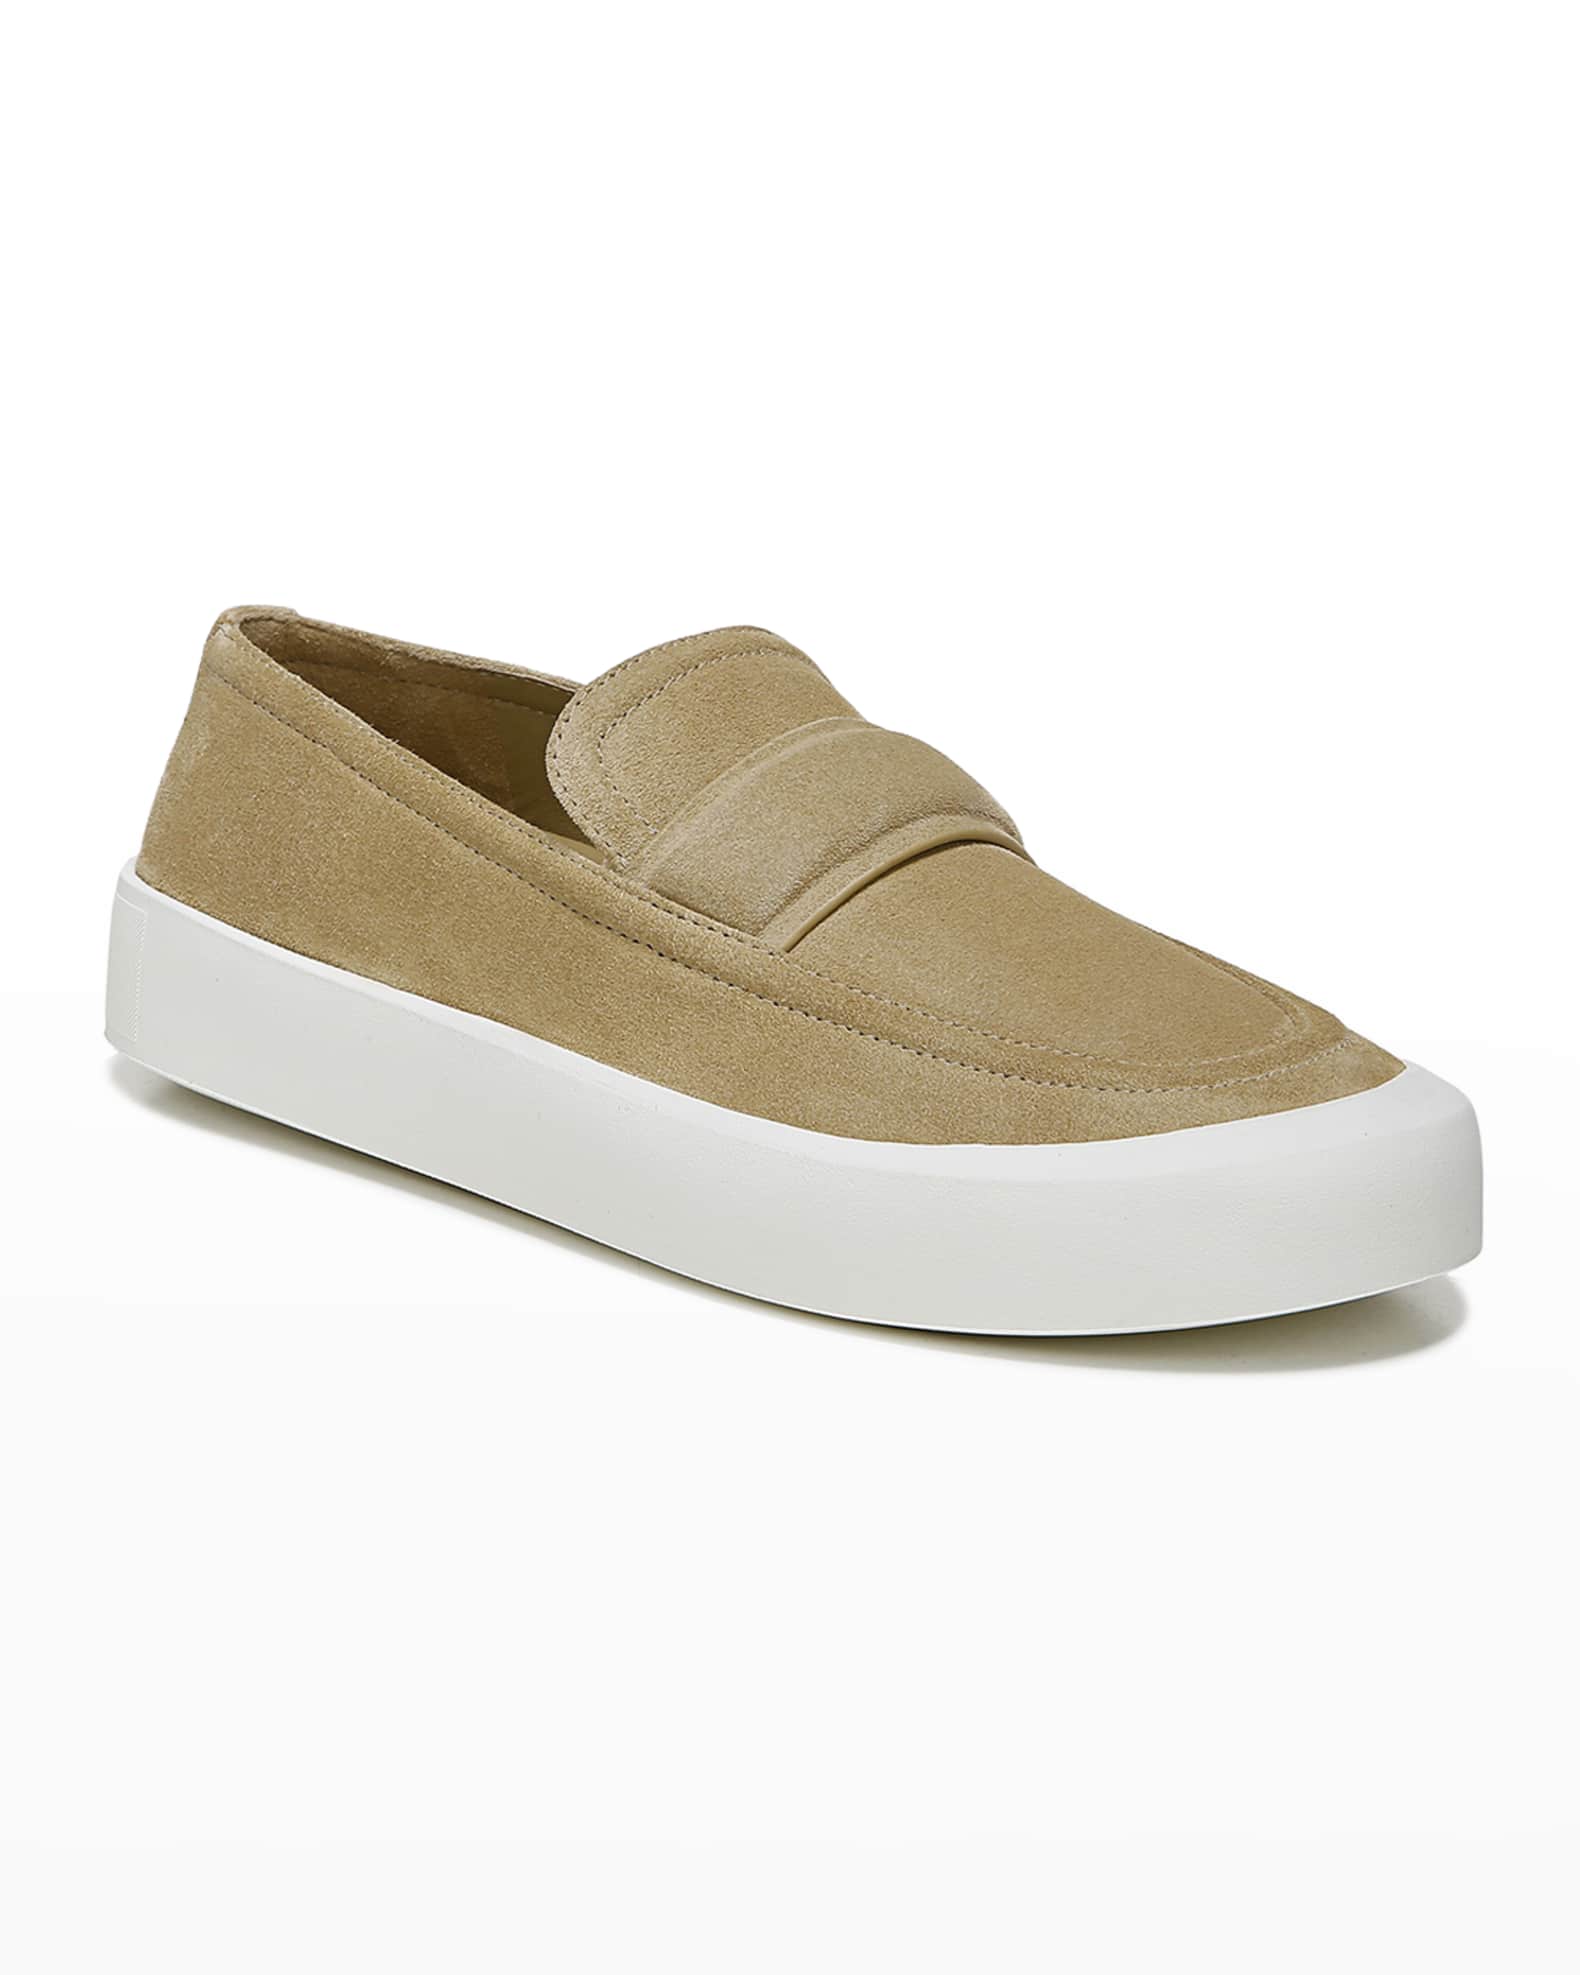 Vince Ghita Suede Slip-On Loafer Sneakers | Neiman Marcus